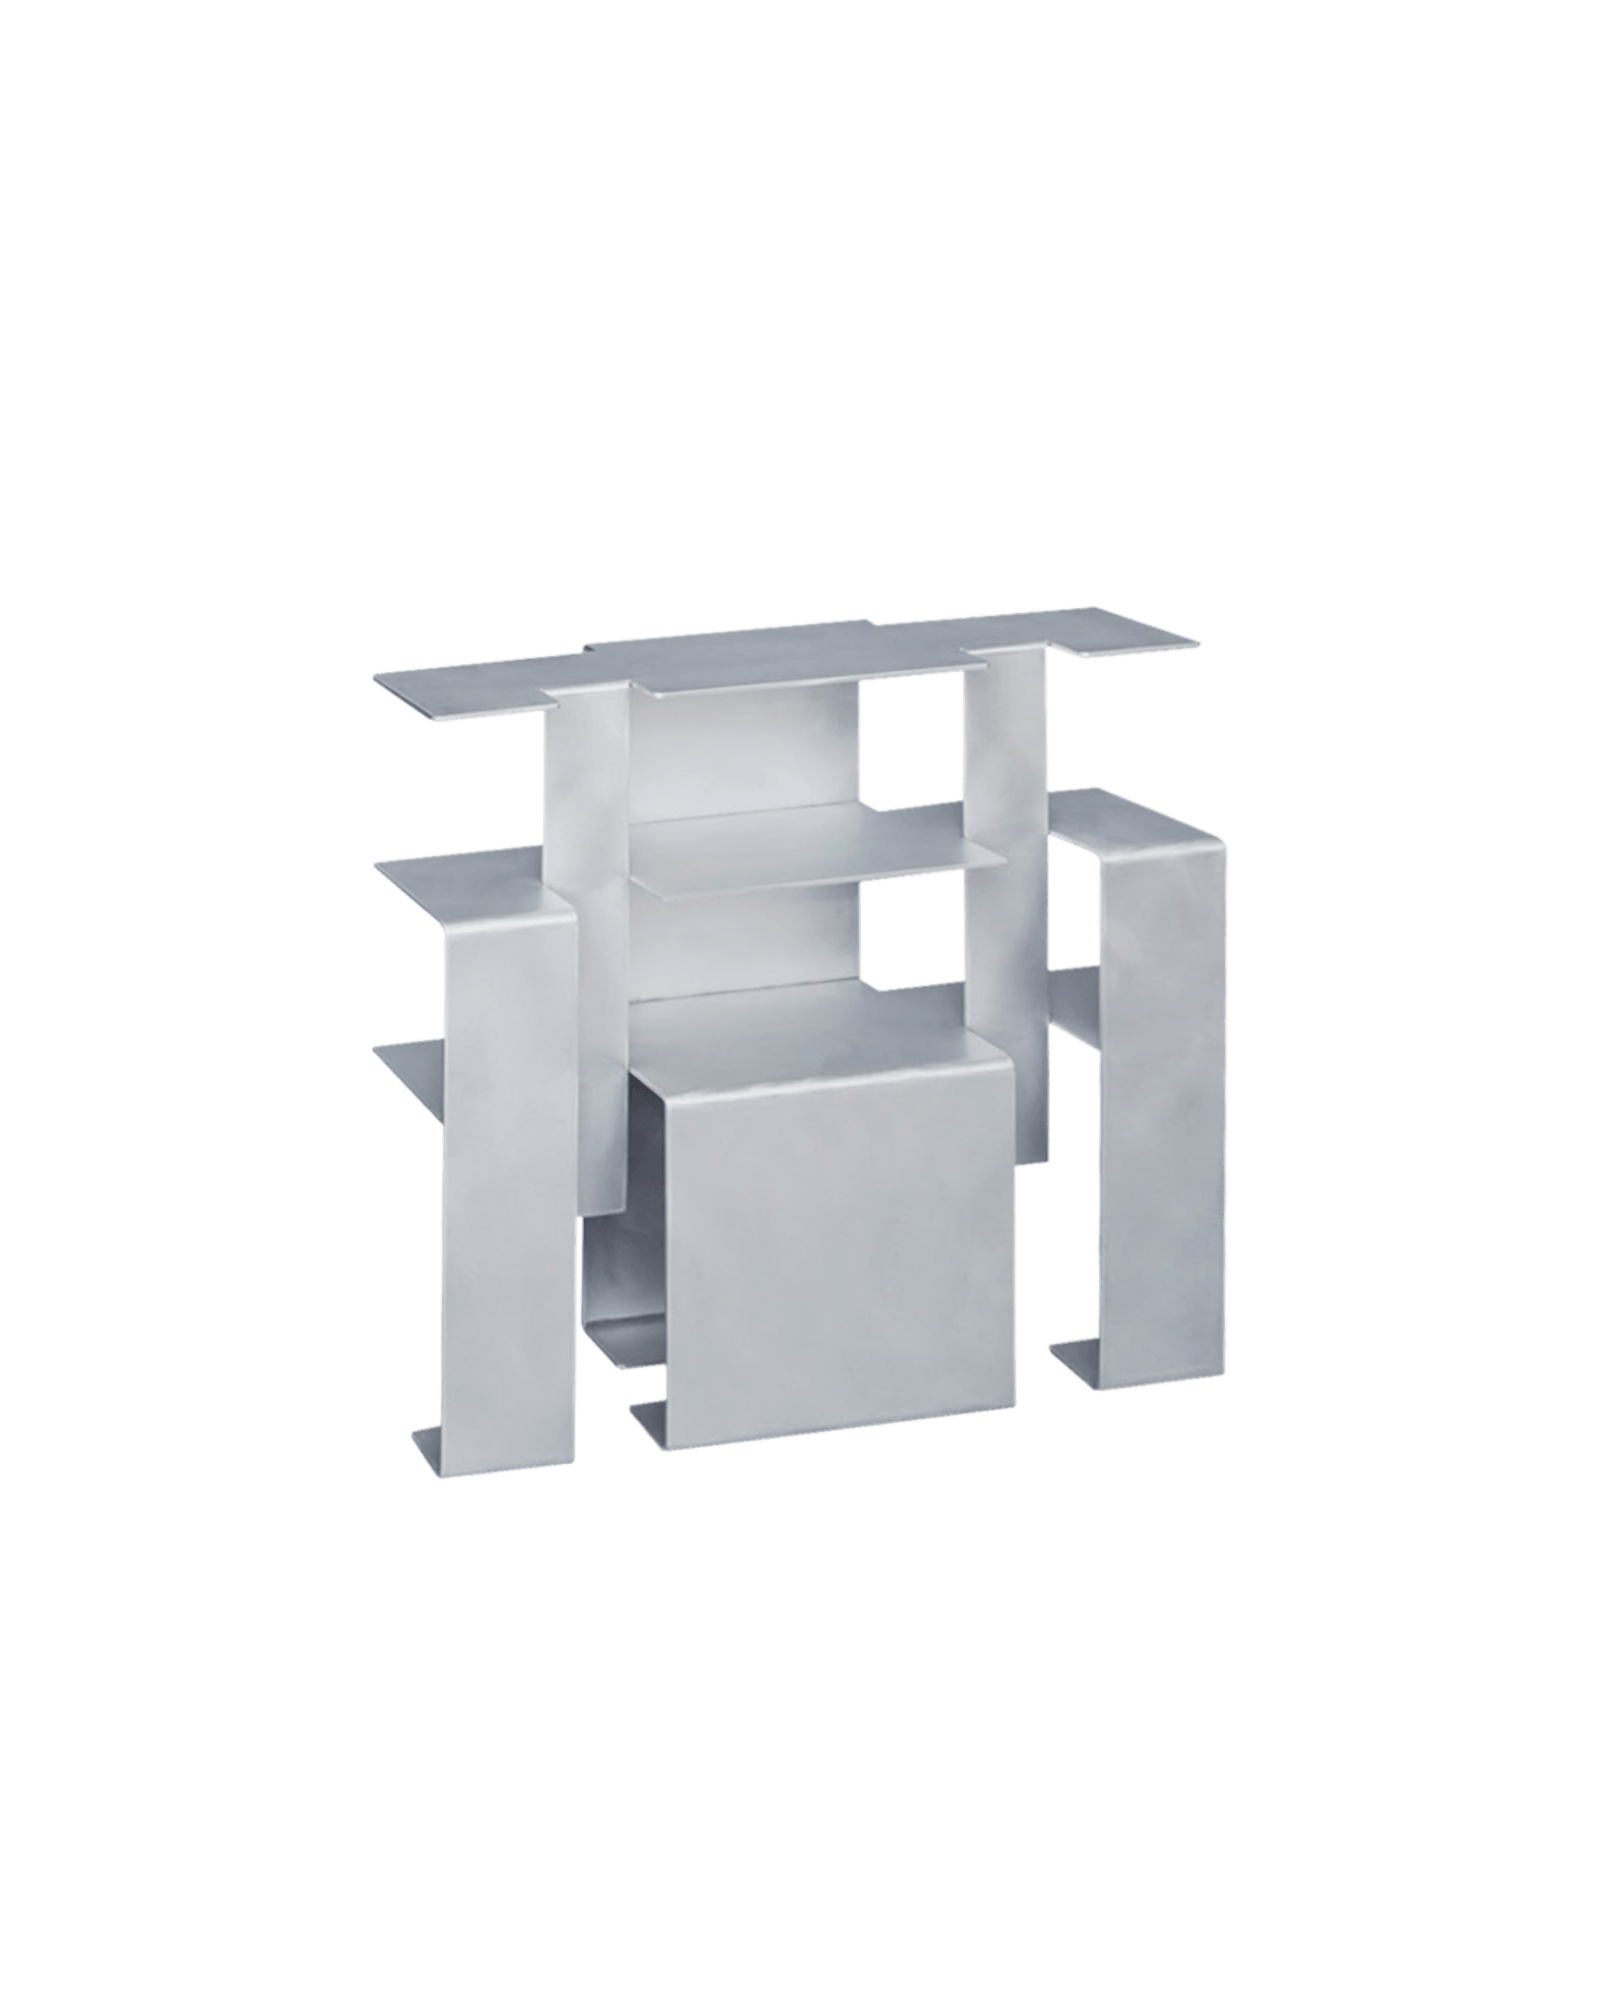 Staple Console, Fortress, Wendy Andreu